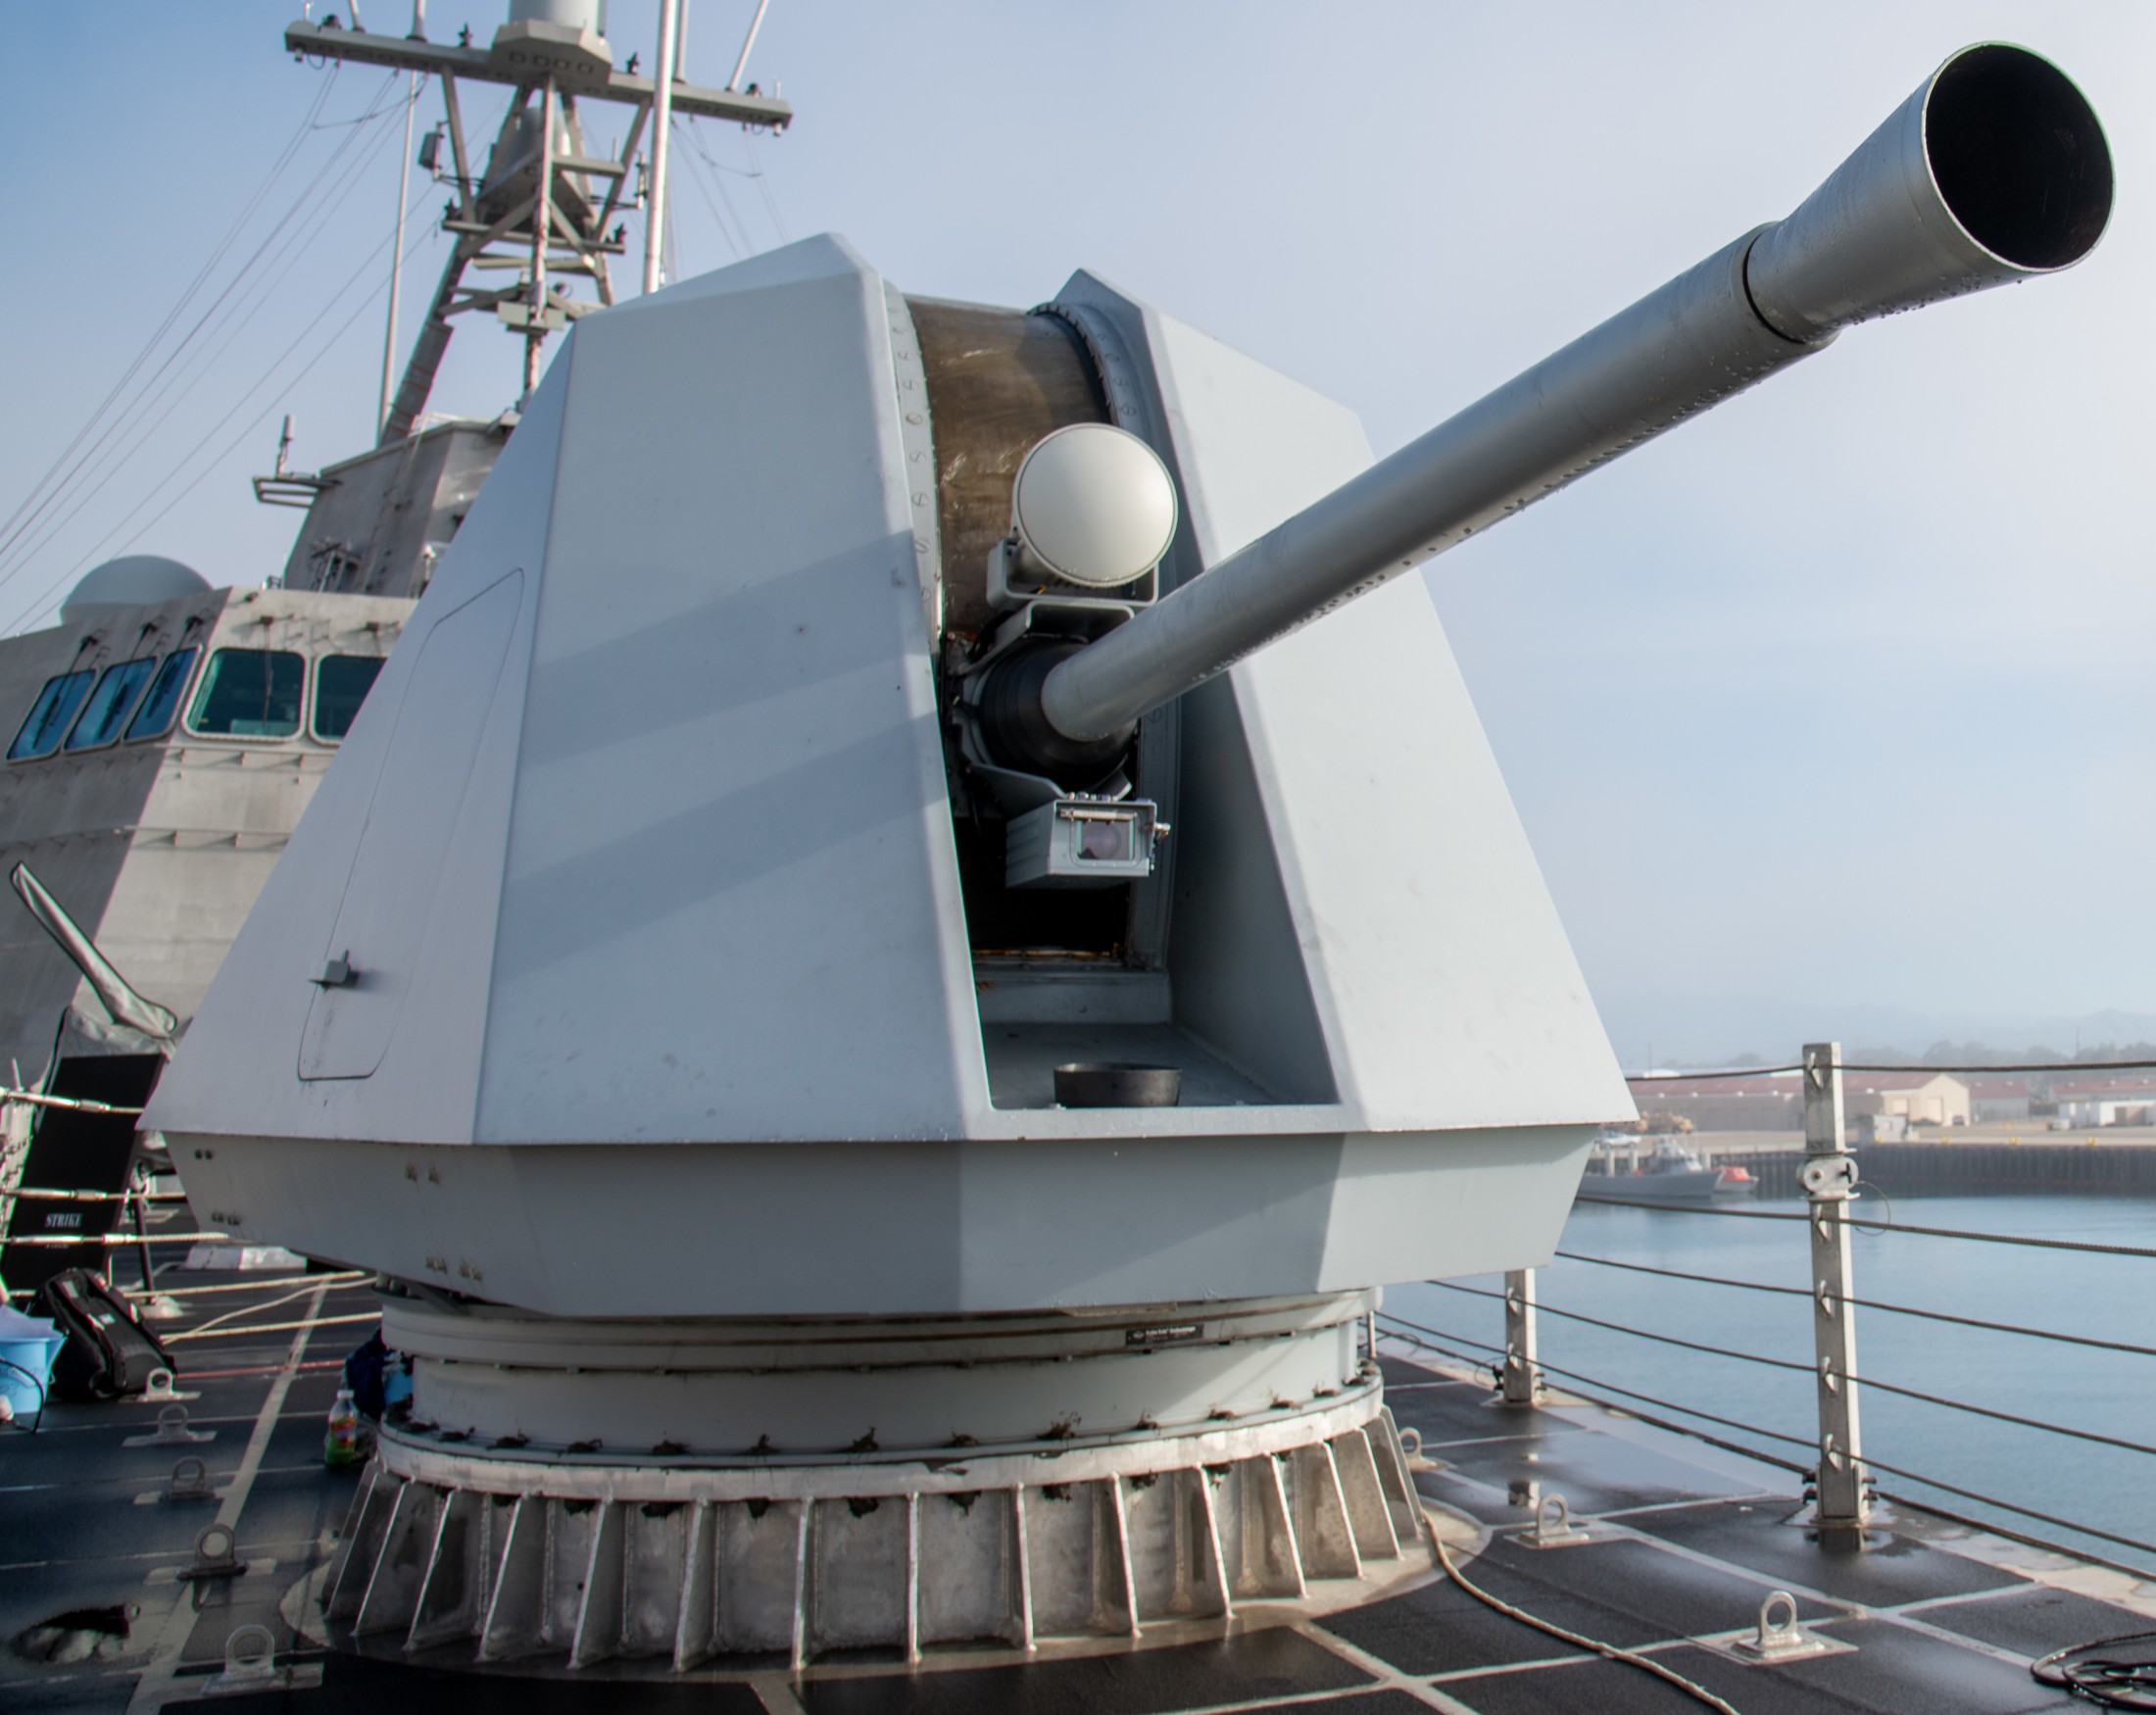 mk.110 mod.0 57mm naval gun bofors 57/L70 bae systems independence class littoral combat ship lcs us navy 35